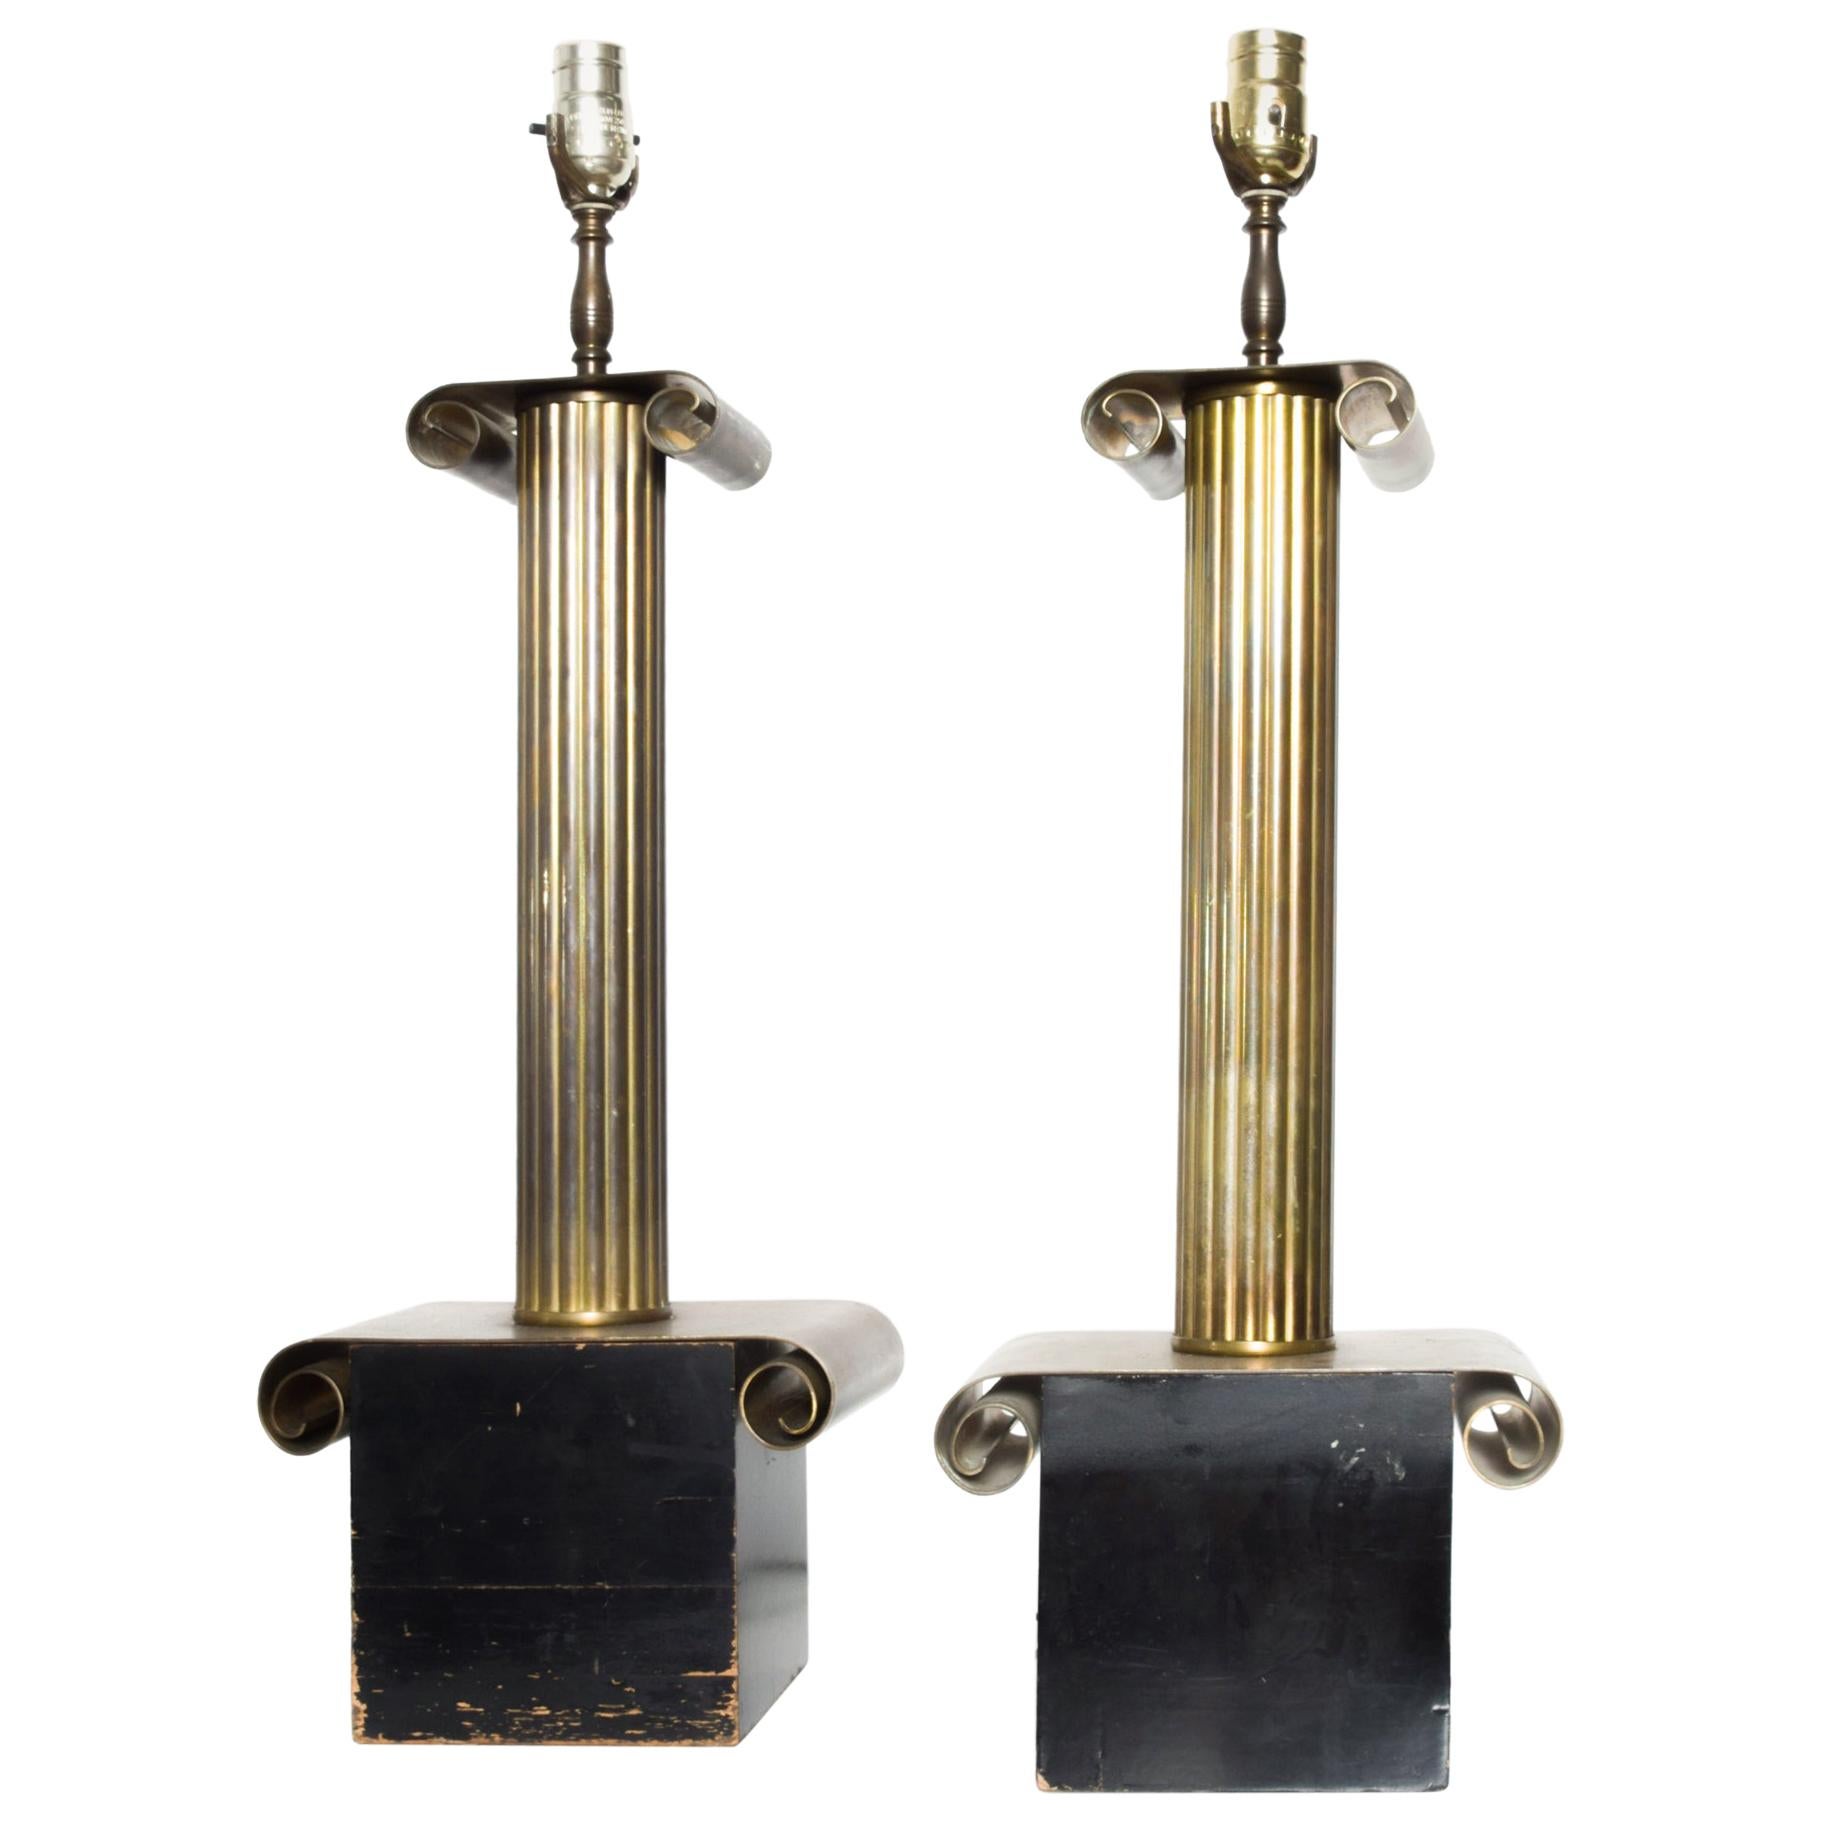 Pair of Regency Neoclassical Stiffel Stately Table Lamps in Bronze & Black 1960s